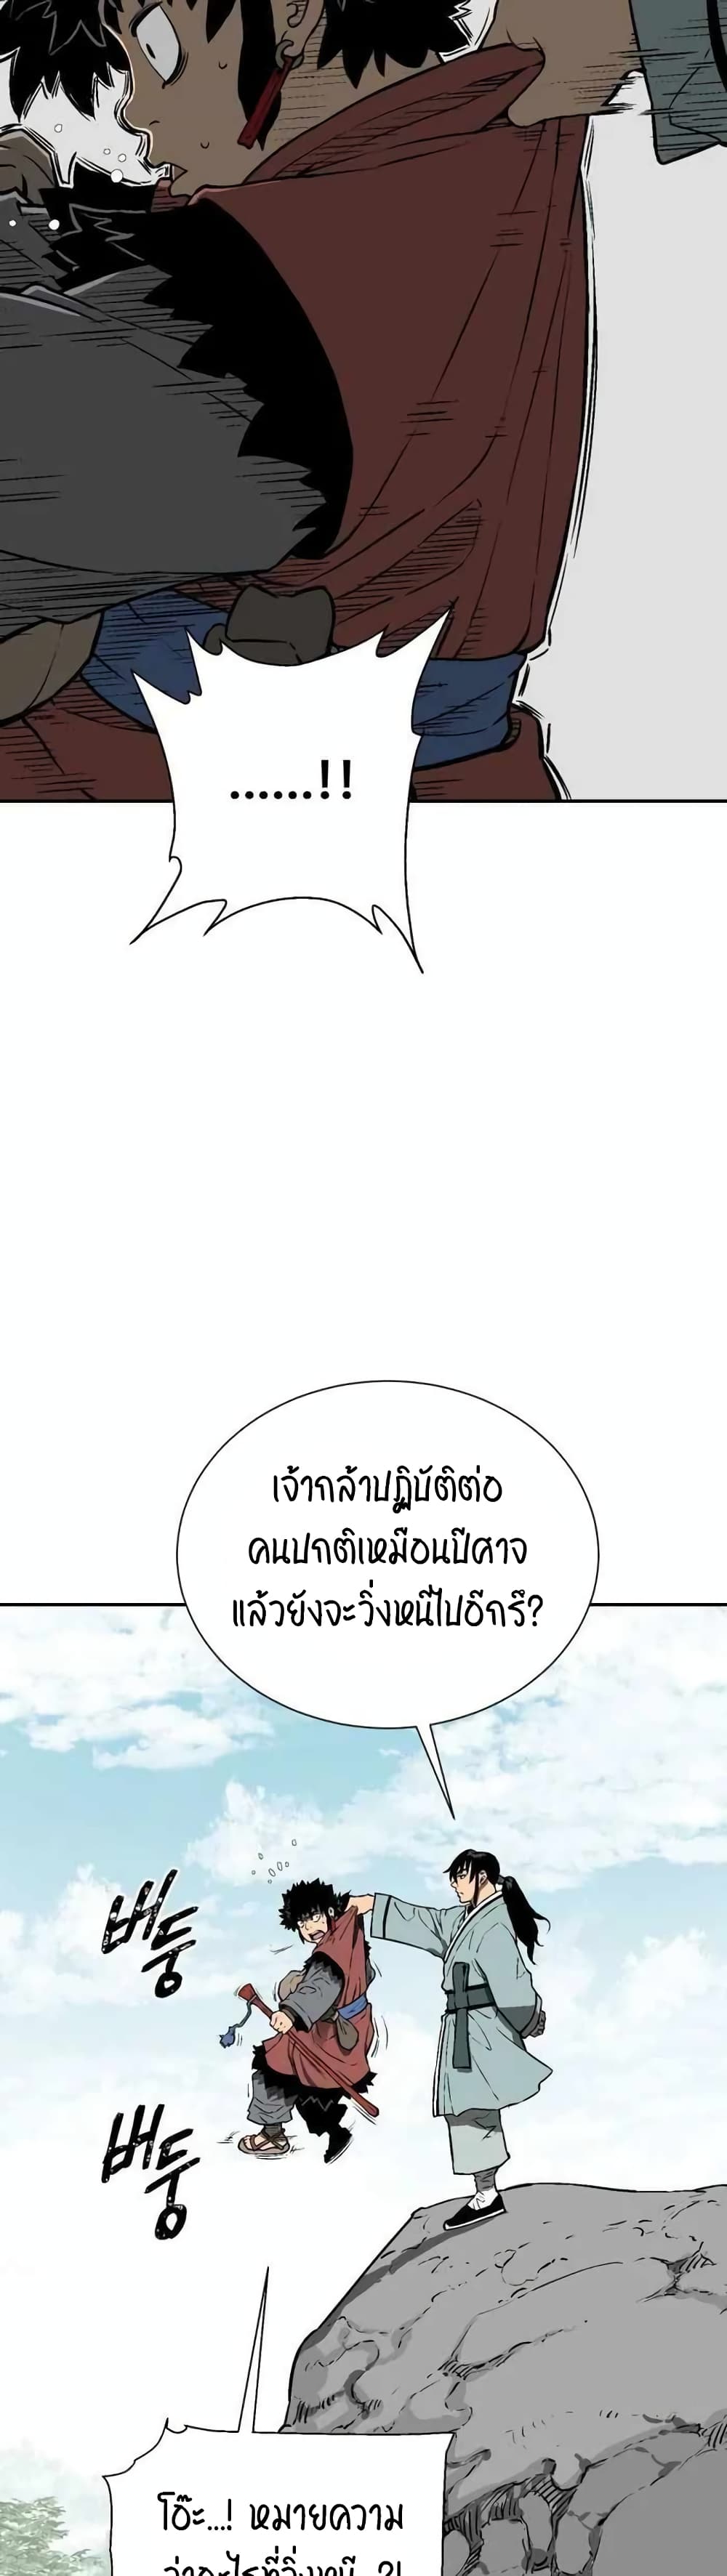 Tales of A Shinning Sword ตอนที่ 18 (18)